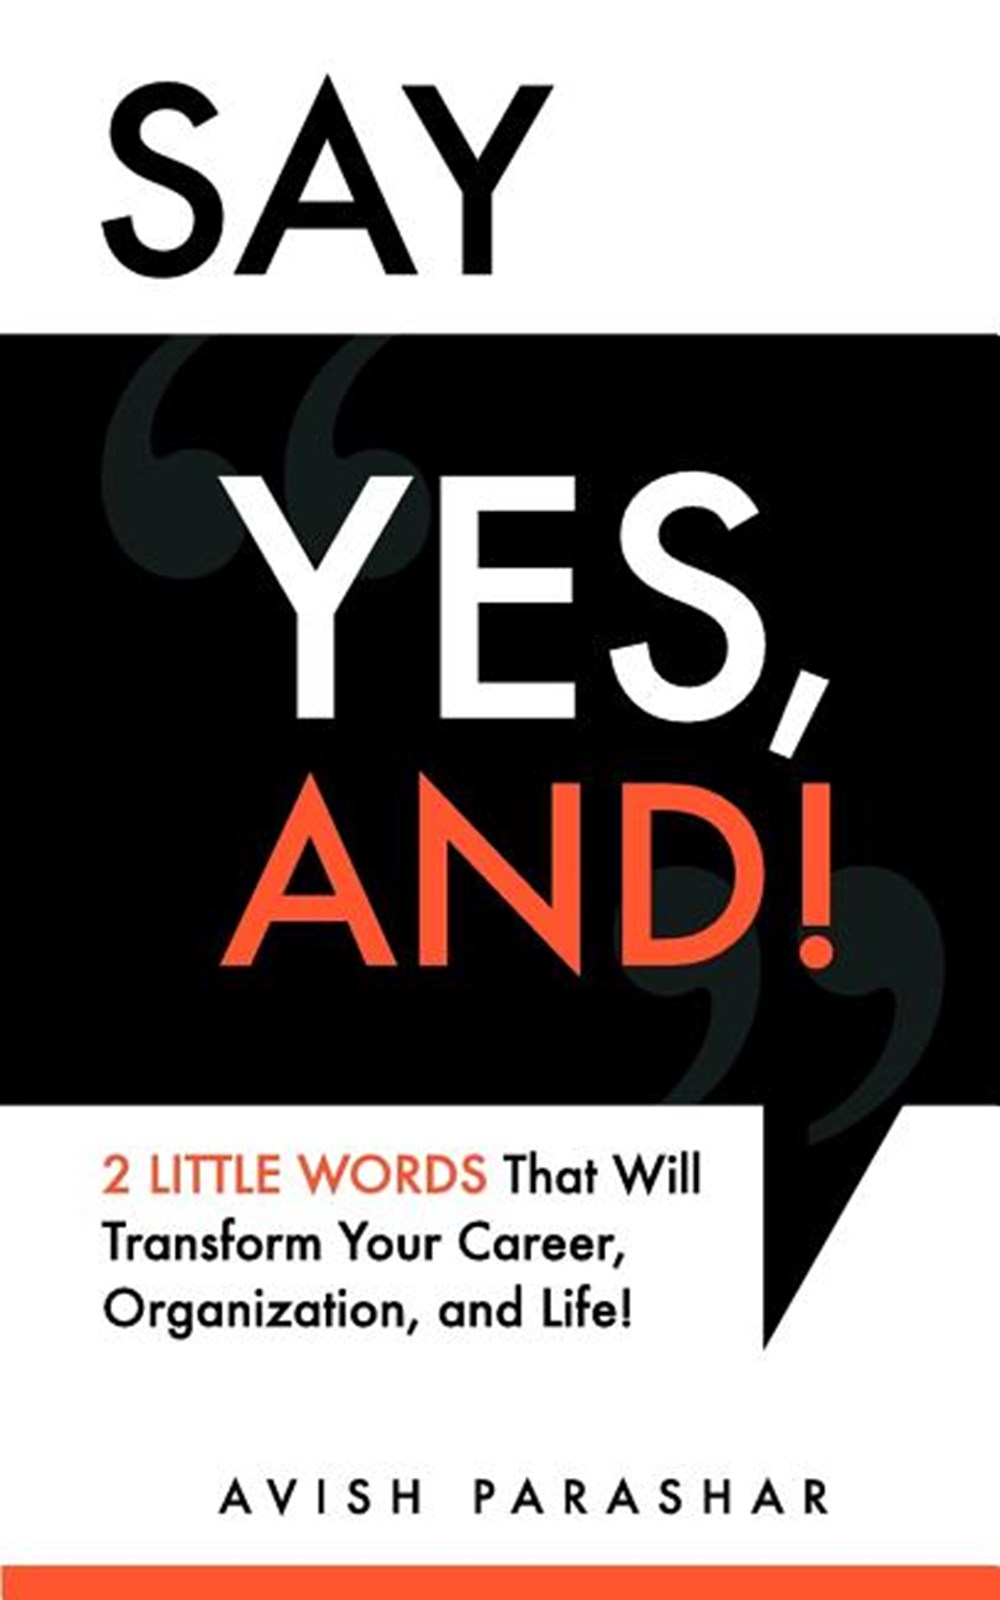 Say "Yes, And!" 2 Little Words That Will Transform Your Career, Organization, and Life!